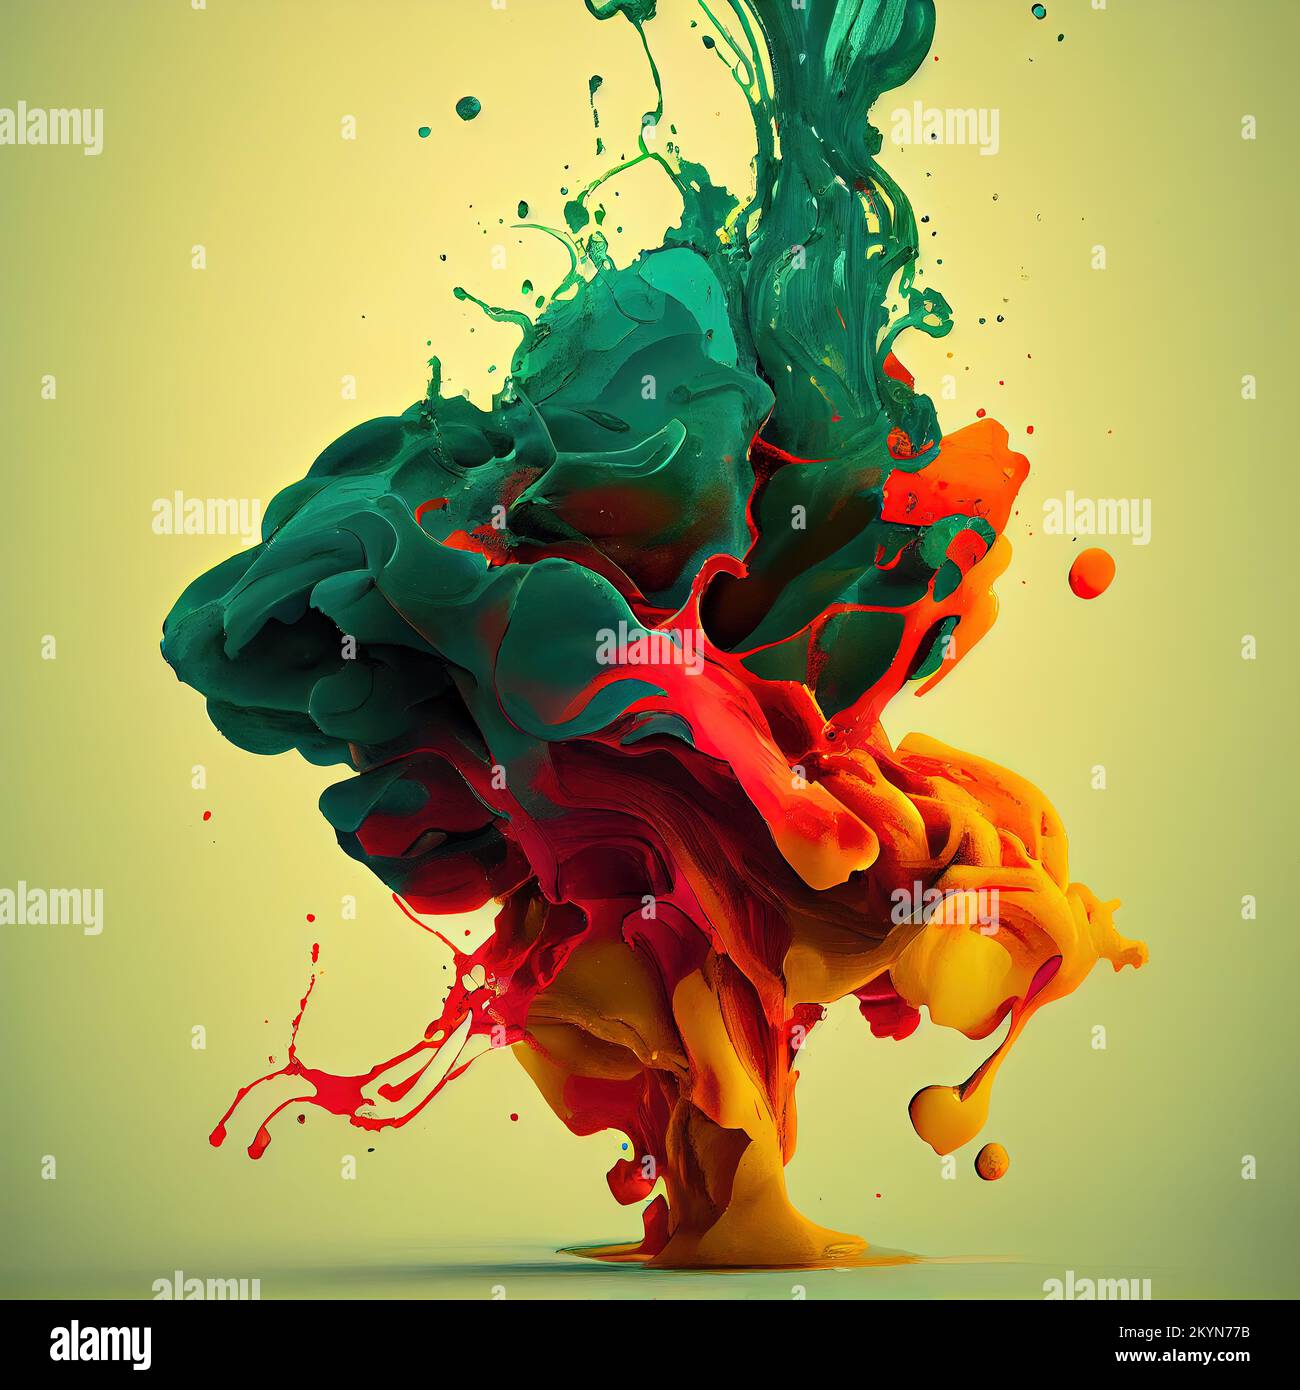 Chaos concept. An ink in water illustration of yellow, orange, green colors on a seamless green background. Stock Photo